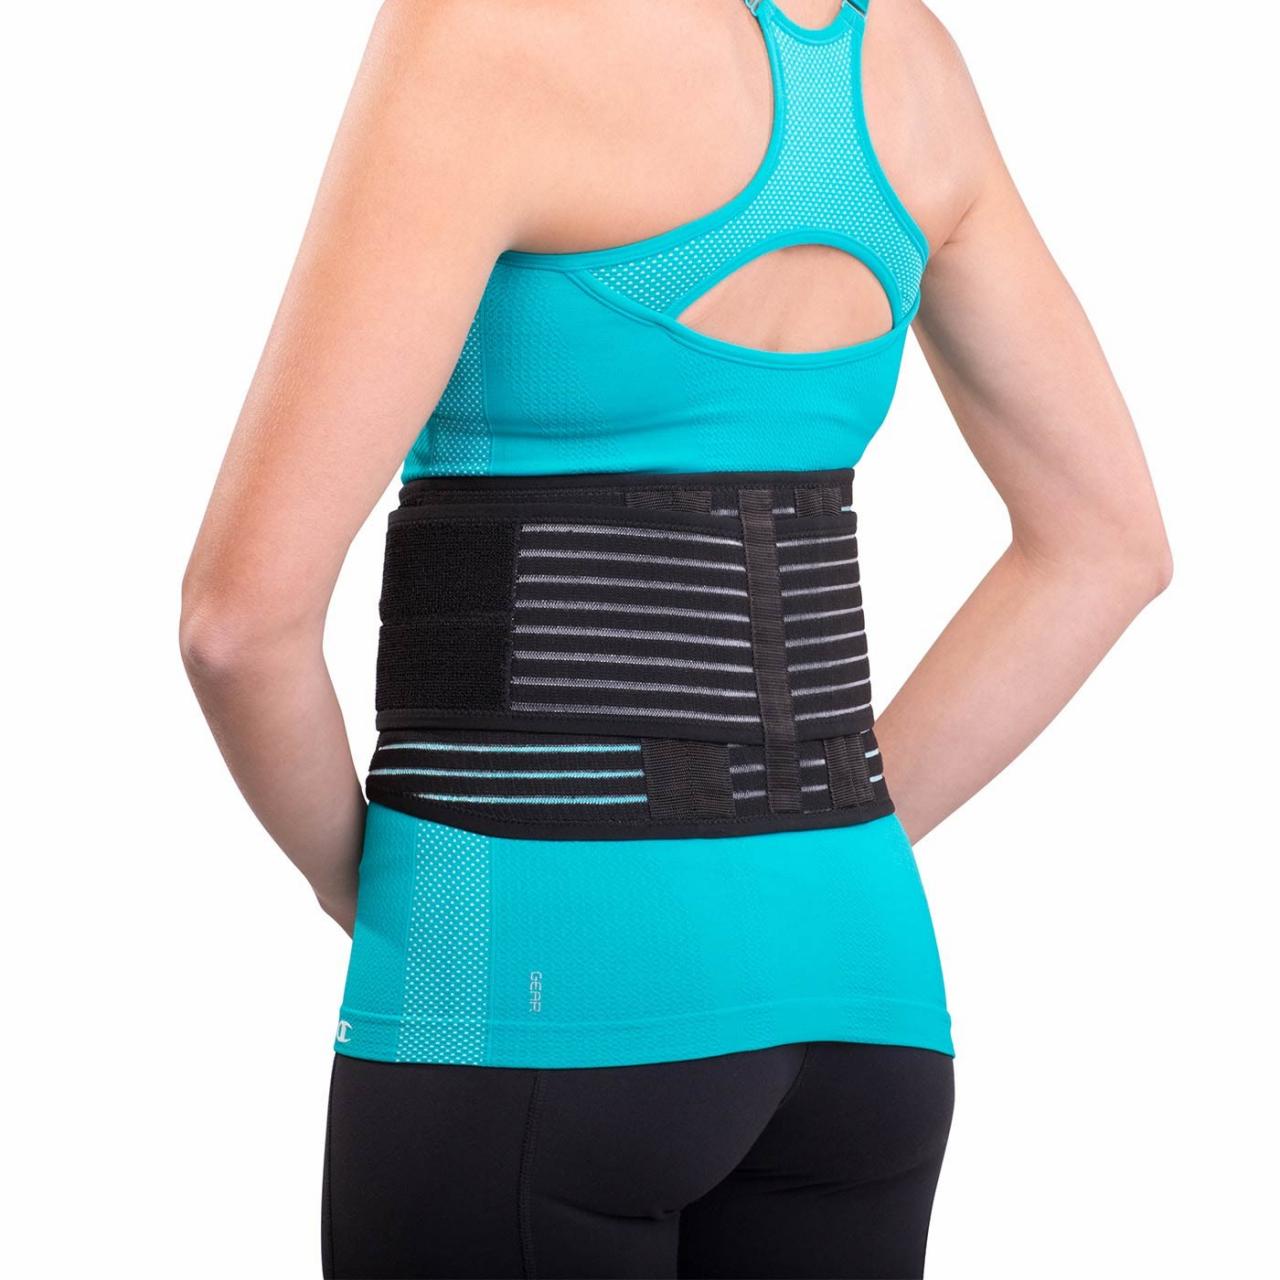 Review for Lower Back Brace by BraceUP - Breathable Waist Lumbar Back  Support Belt for Sciatica, Herniated Disc, Scoliosis Back Pain Relief,  Heavy lifting, for Men and Women, with Dual Adjustable Straps (